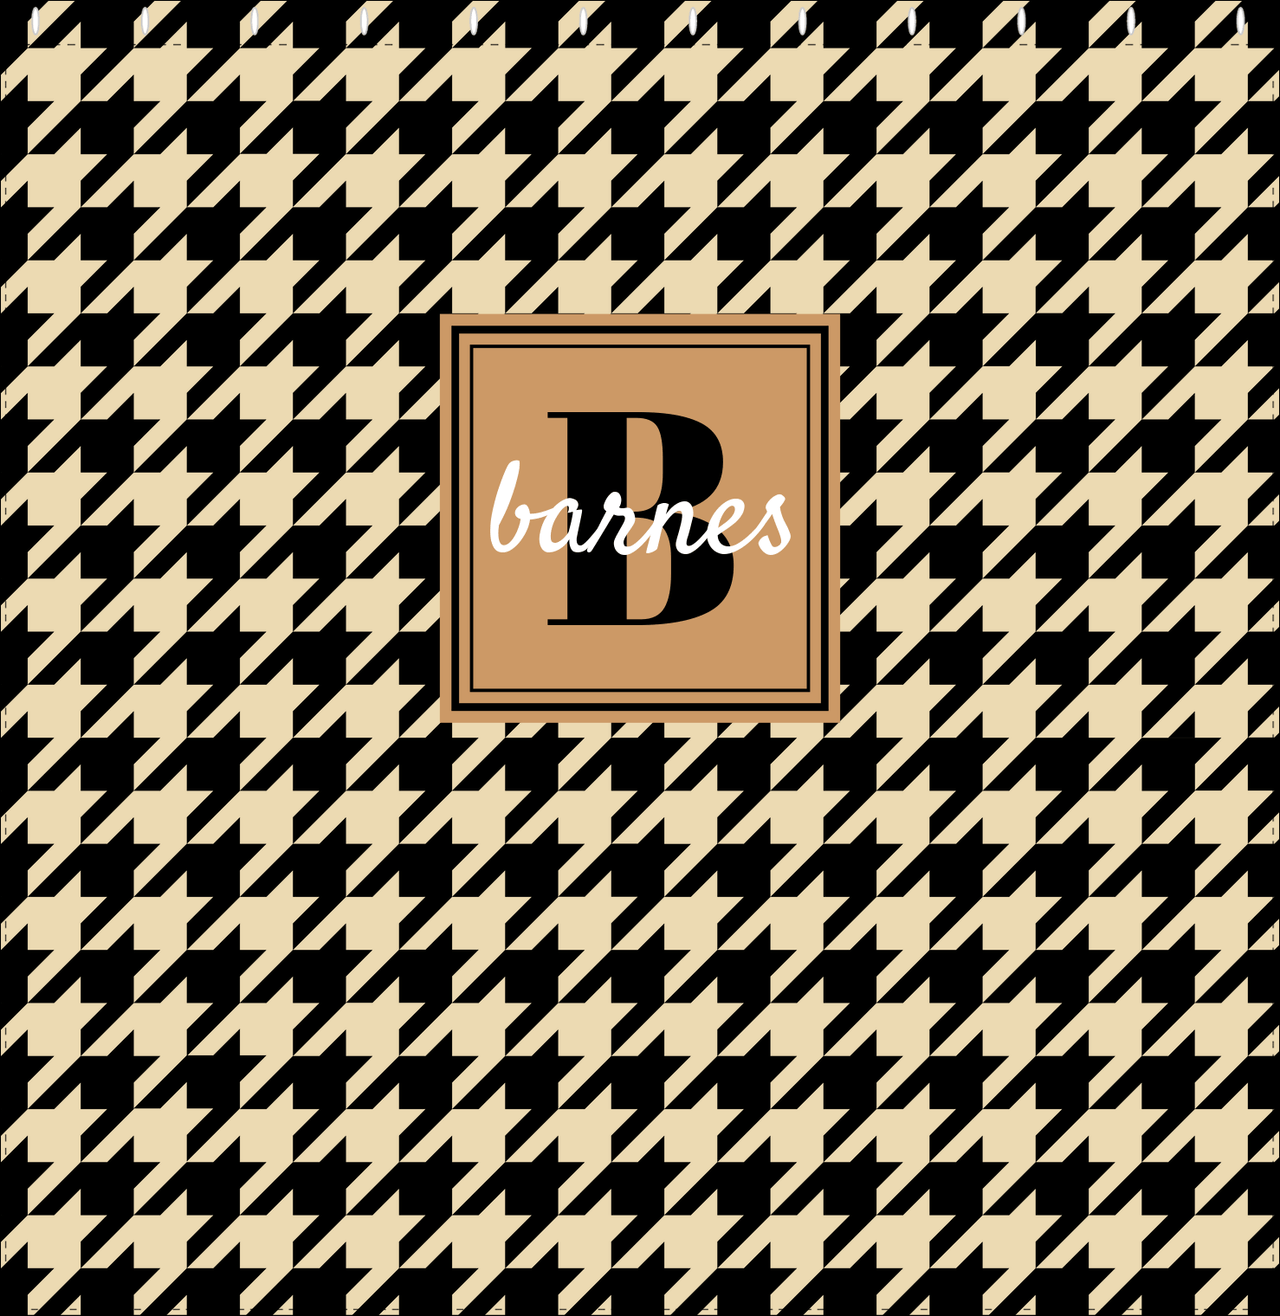 Personalized Houndstooth I Shower Curtain - Tan and Black - Square Nameplate - Decorate View